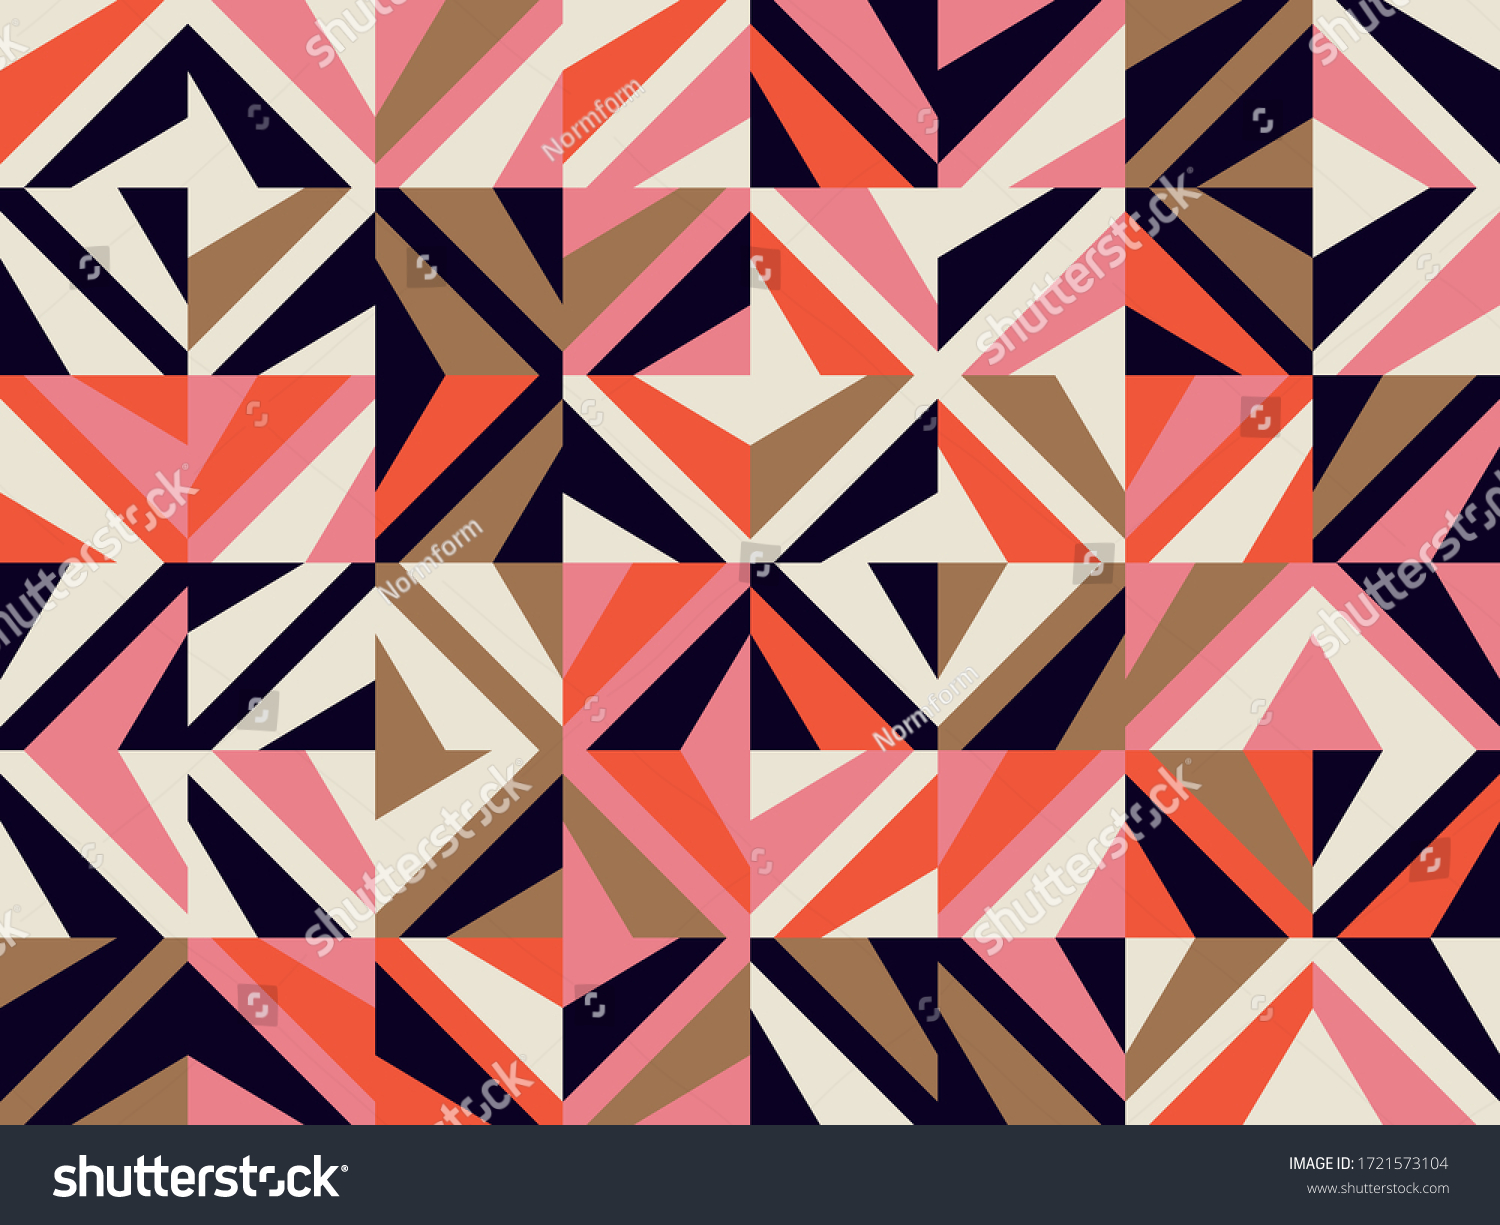 Mid-century geometric abstract pattern with simple shapes and beautiful color palette. Simple geometric pattern composition, best use in web design, business card, invitation, poster, textile print. #1721573104